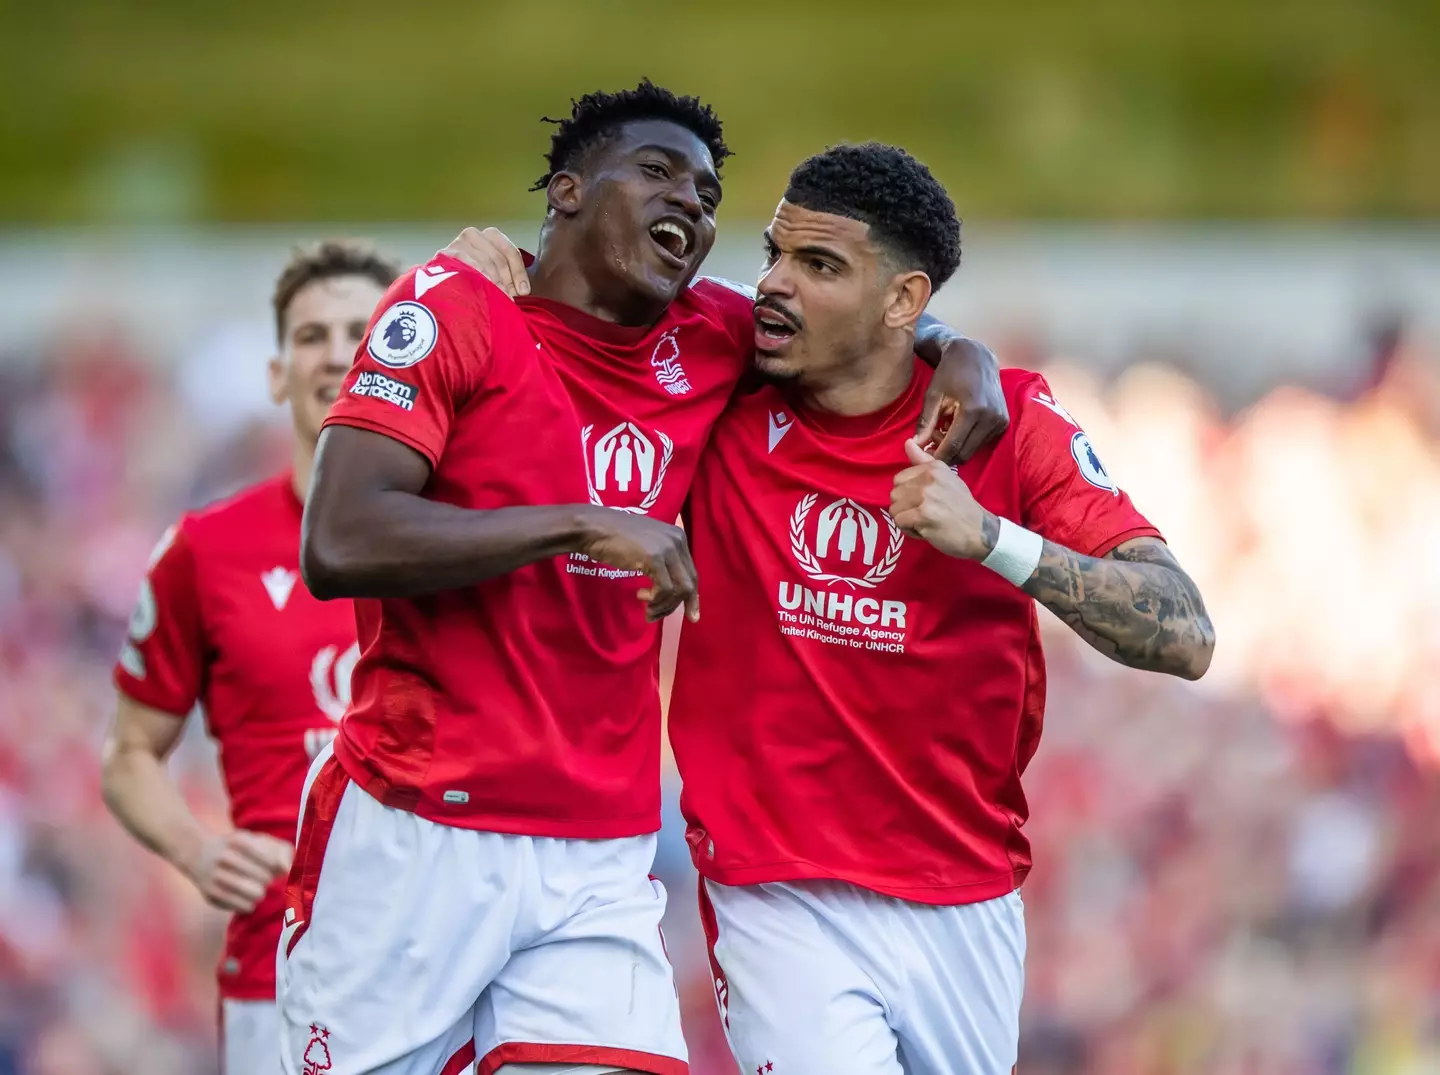 Nottingham Forest's Taiwo Awoniyi and Morgan Gibbs-White pictured (